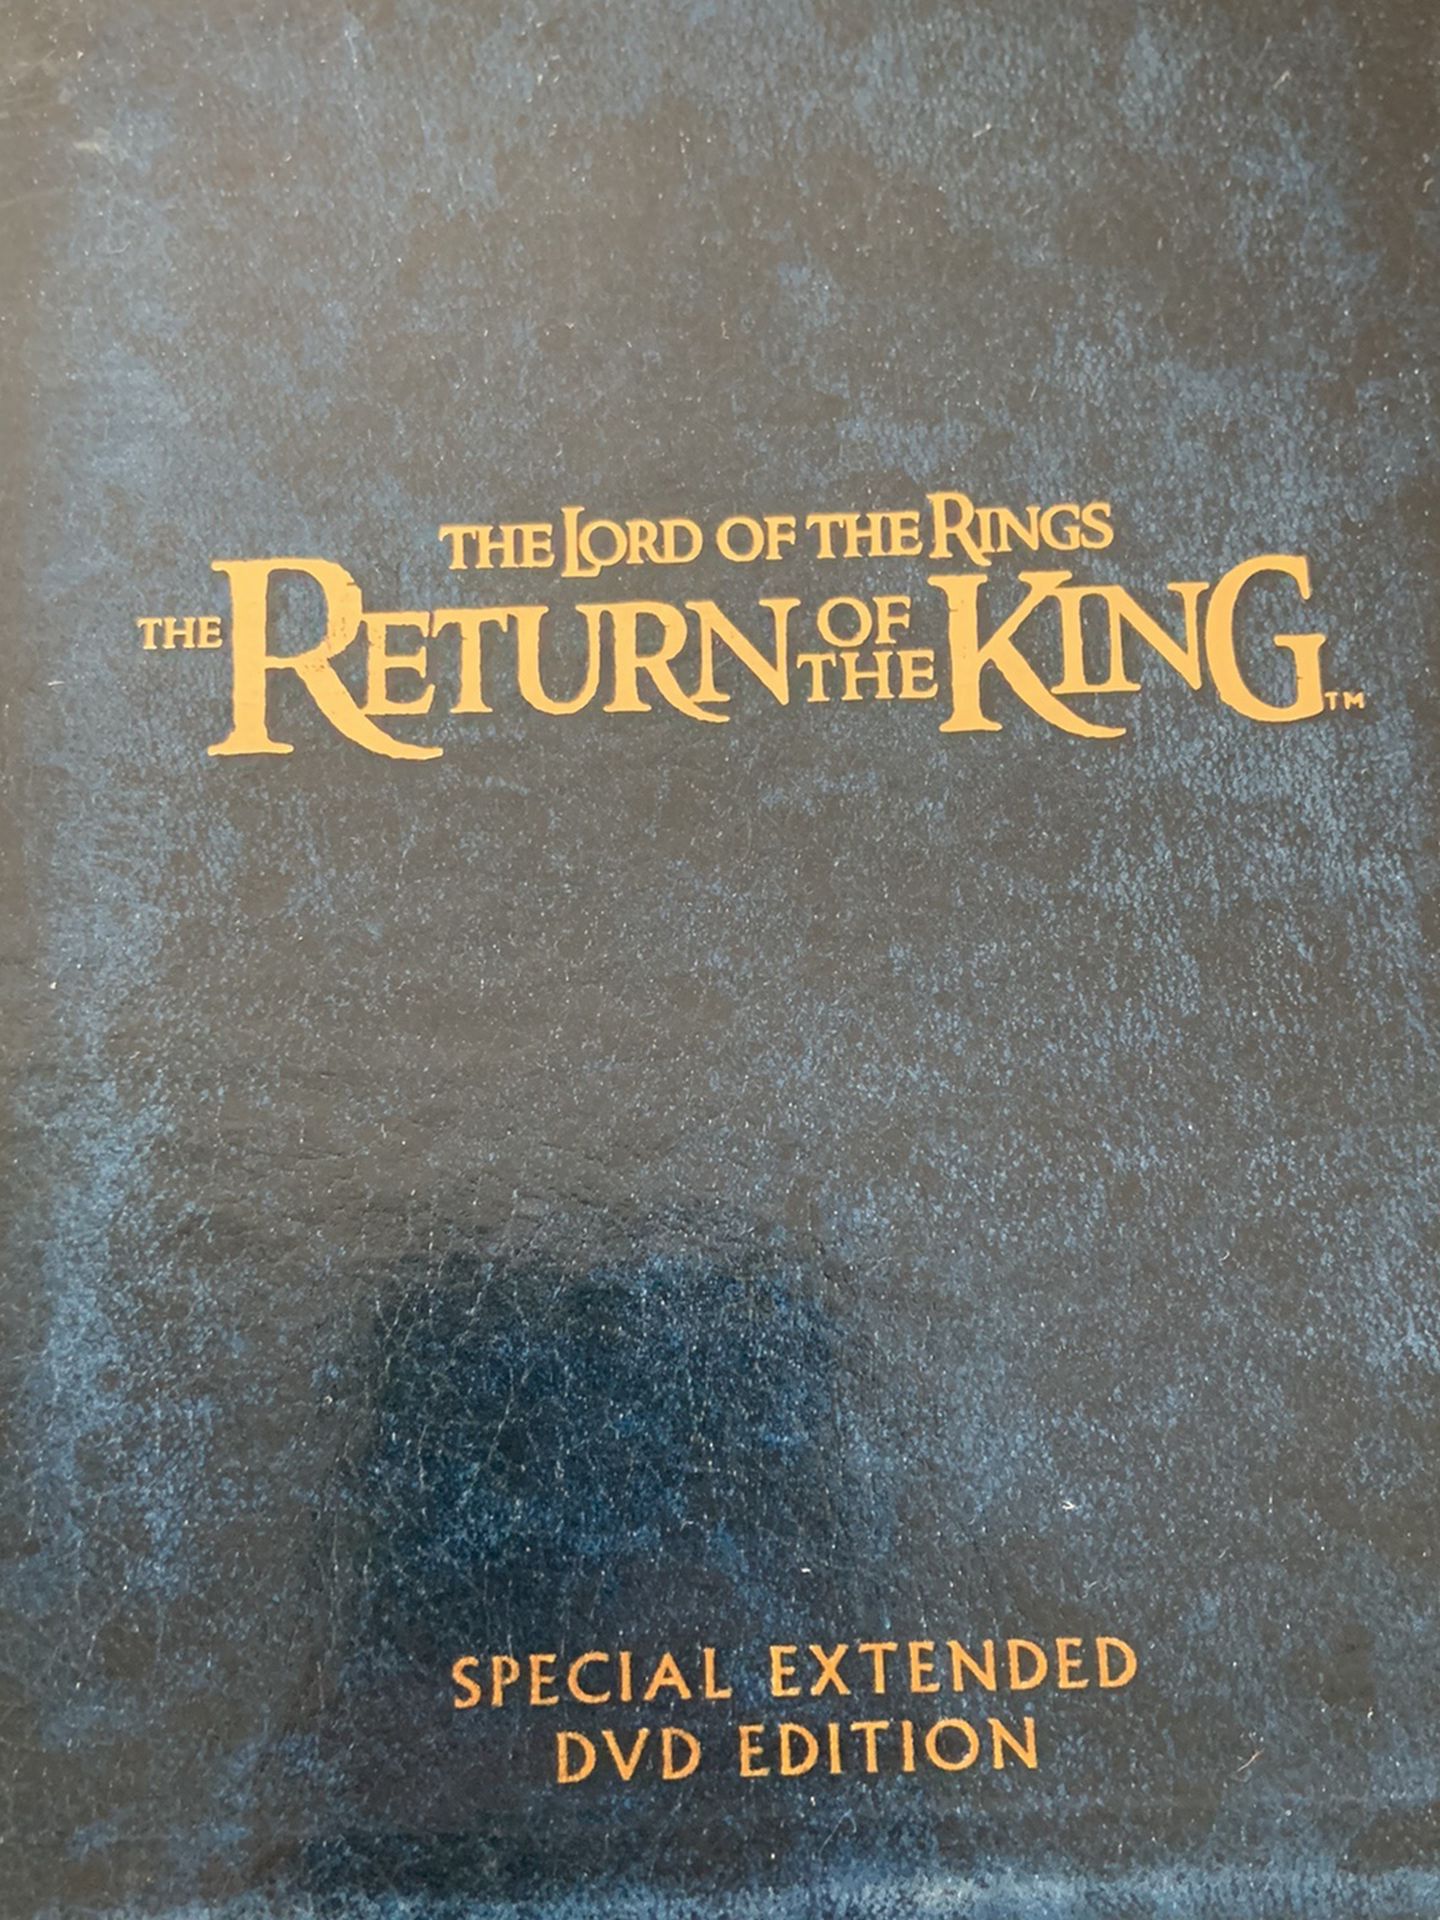 The Lord of the Rings Return of the King extended DVD edition